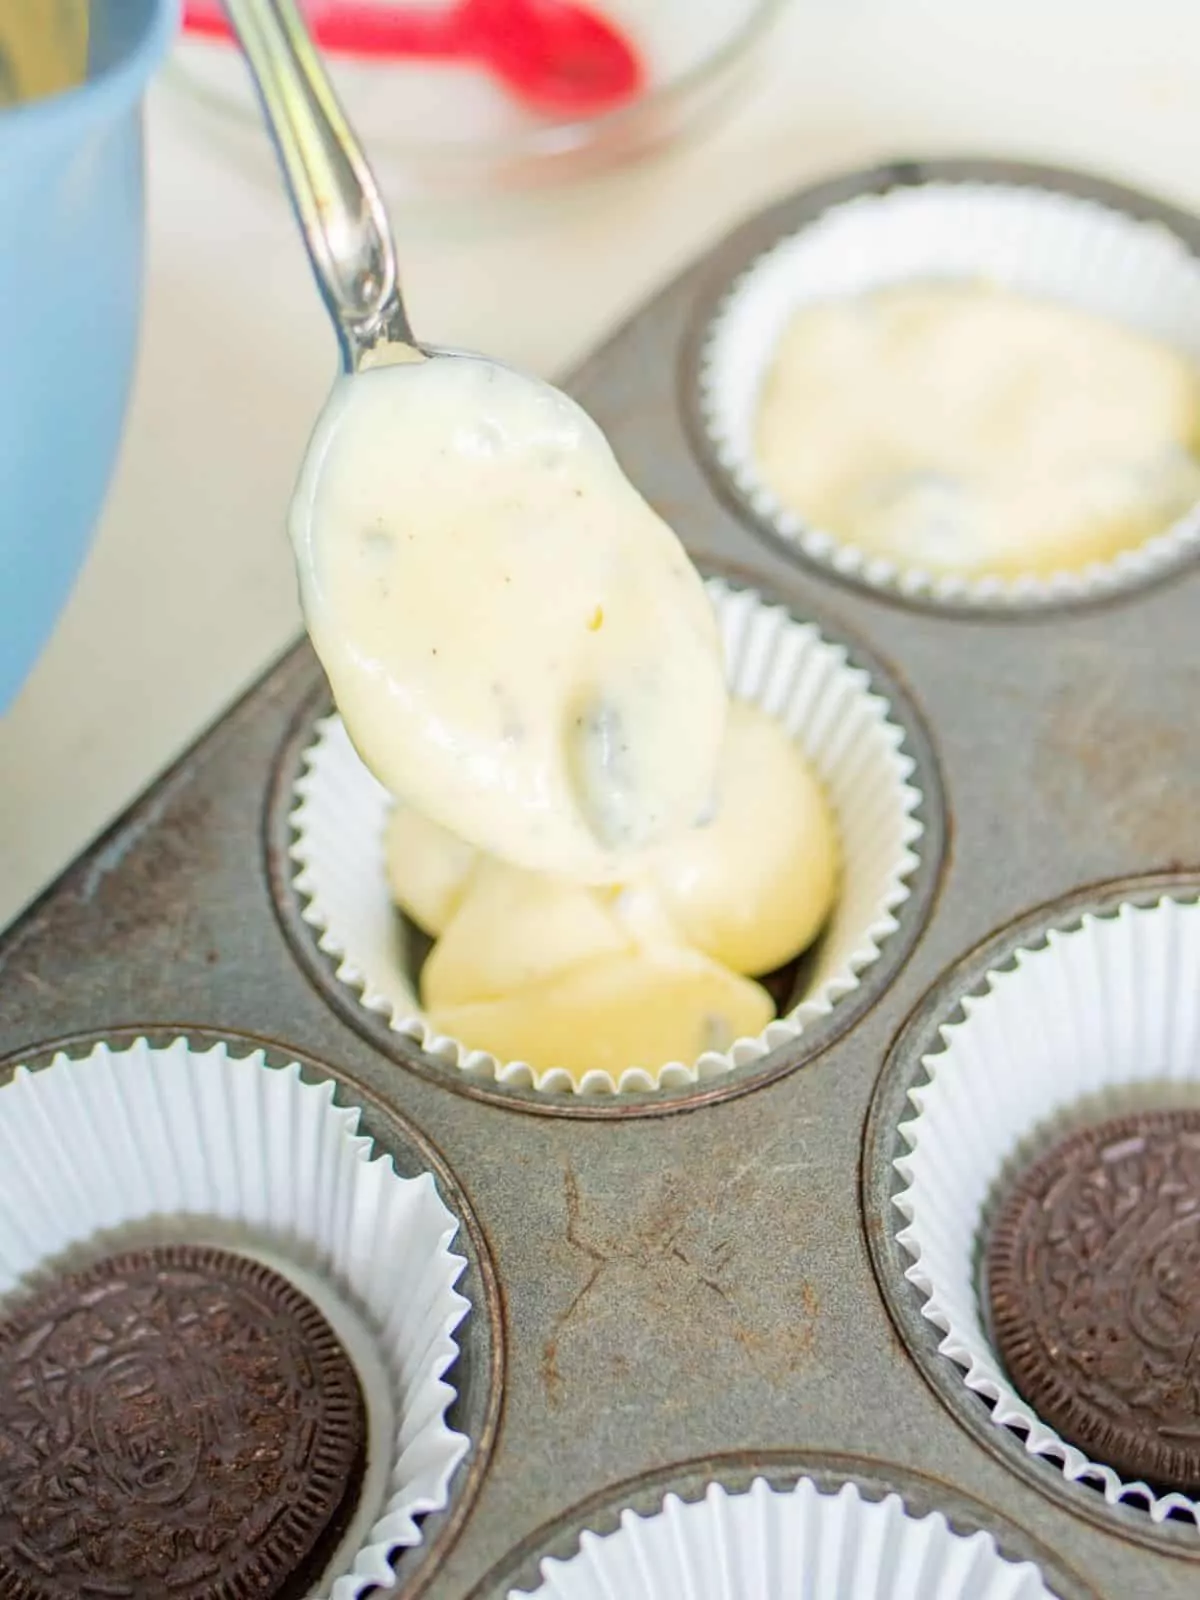 Adding cheesecake mixture to cupcake pan with Oreo cookies in the bottom of each cupcake liner.